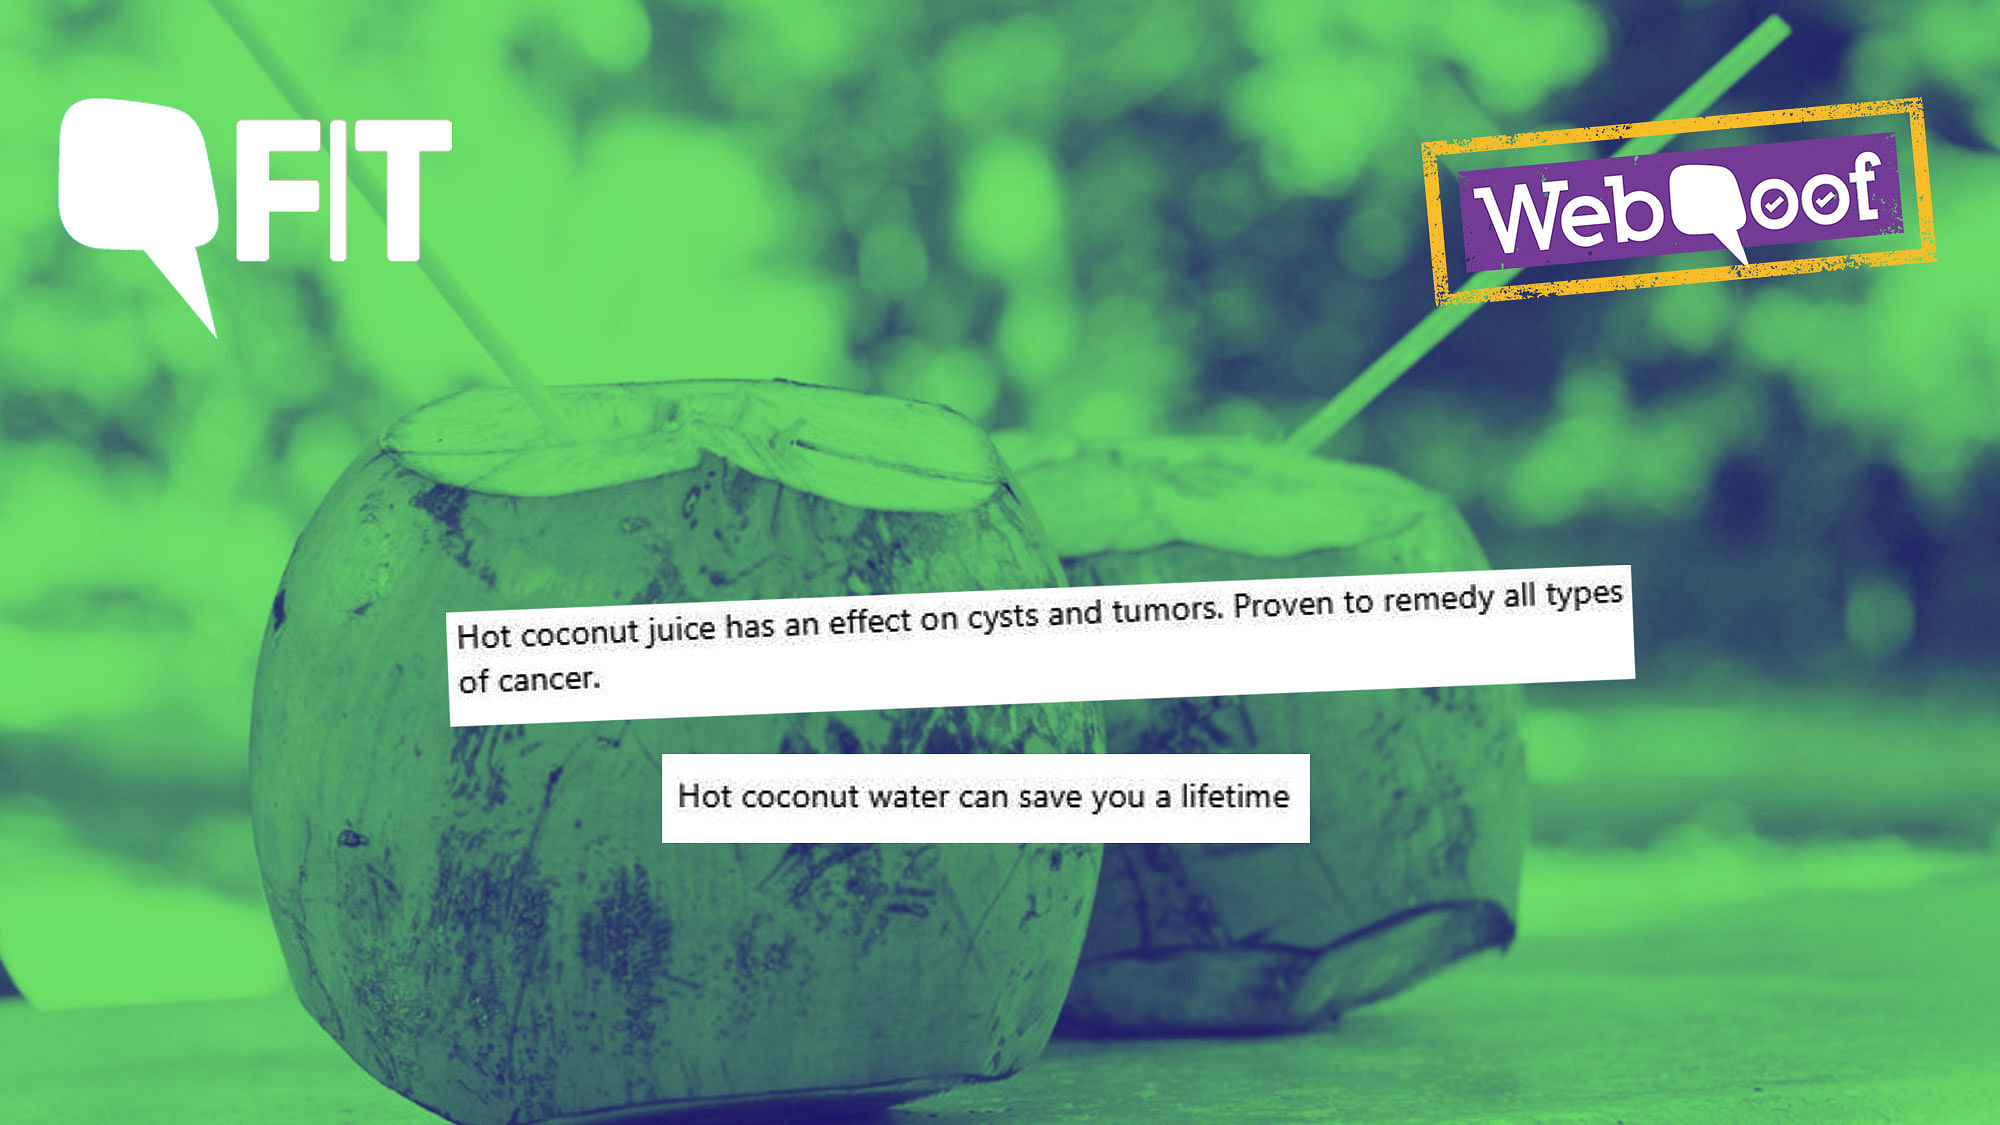 Coconut water is beneficial but cannot cure cancer.